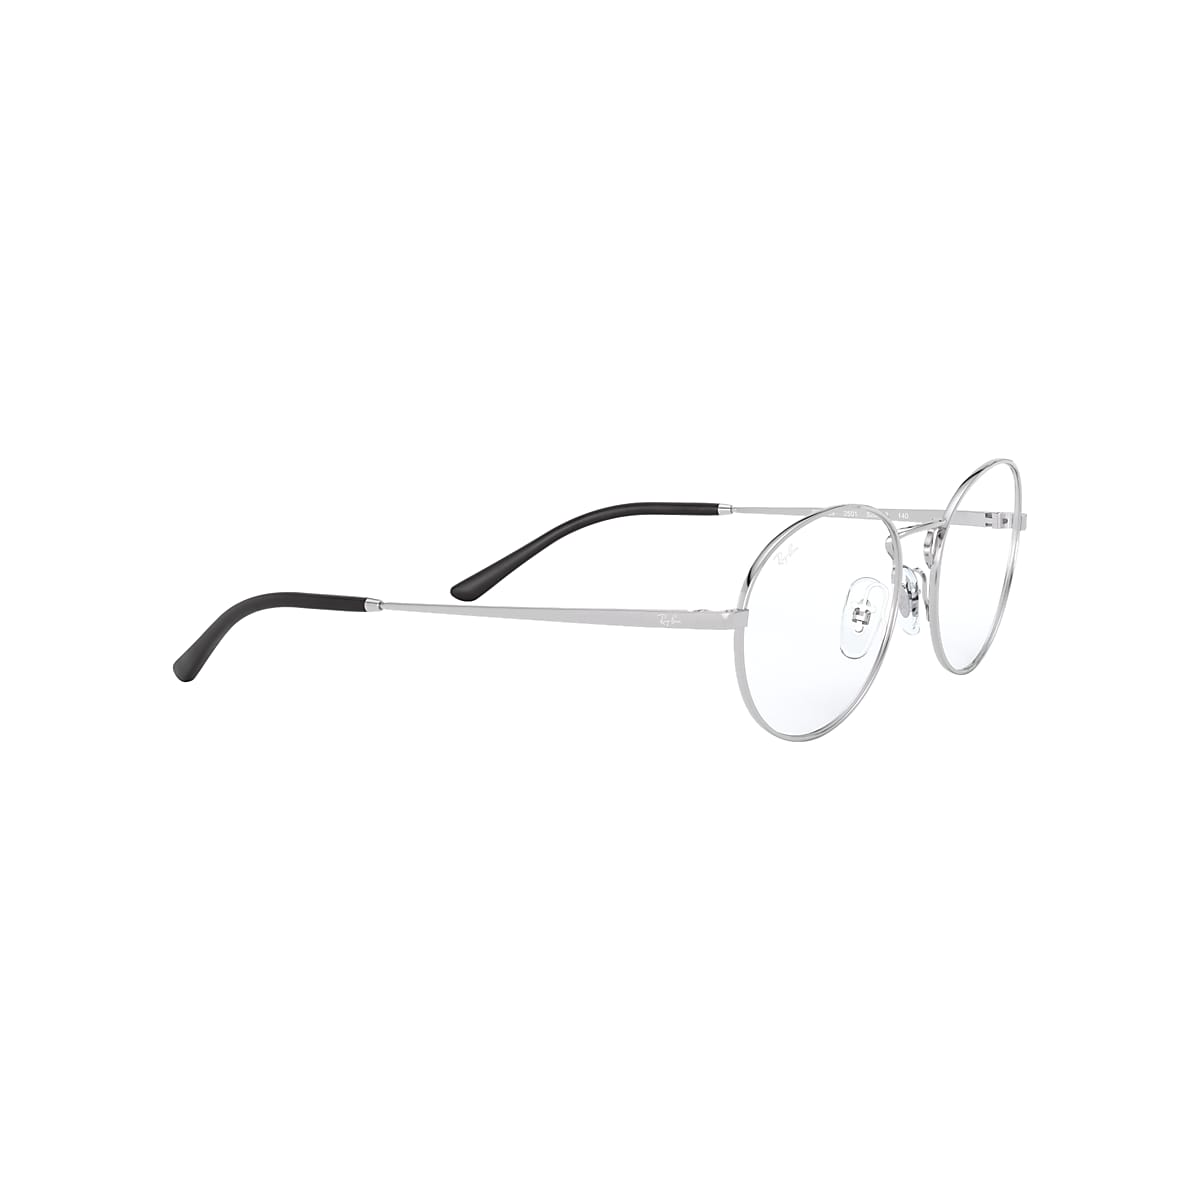 Connected pea pyramid Rb6439 Optics Eyeglasses with Silver Frame | Ray-Ban®